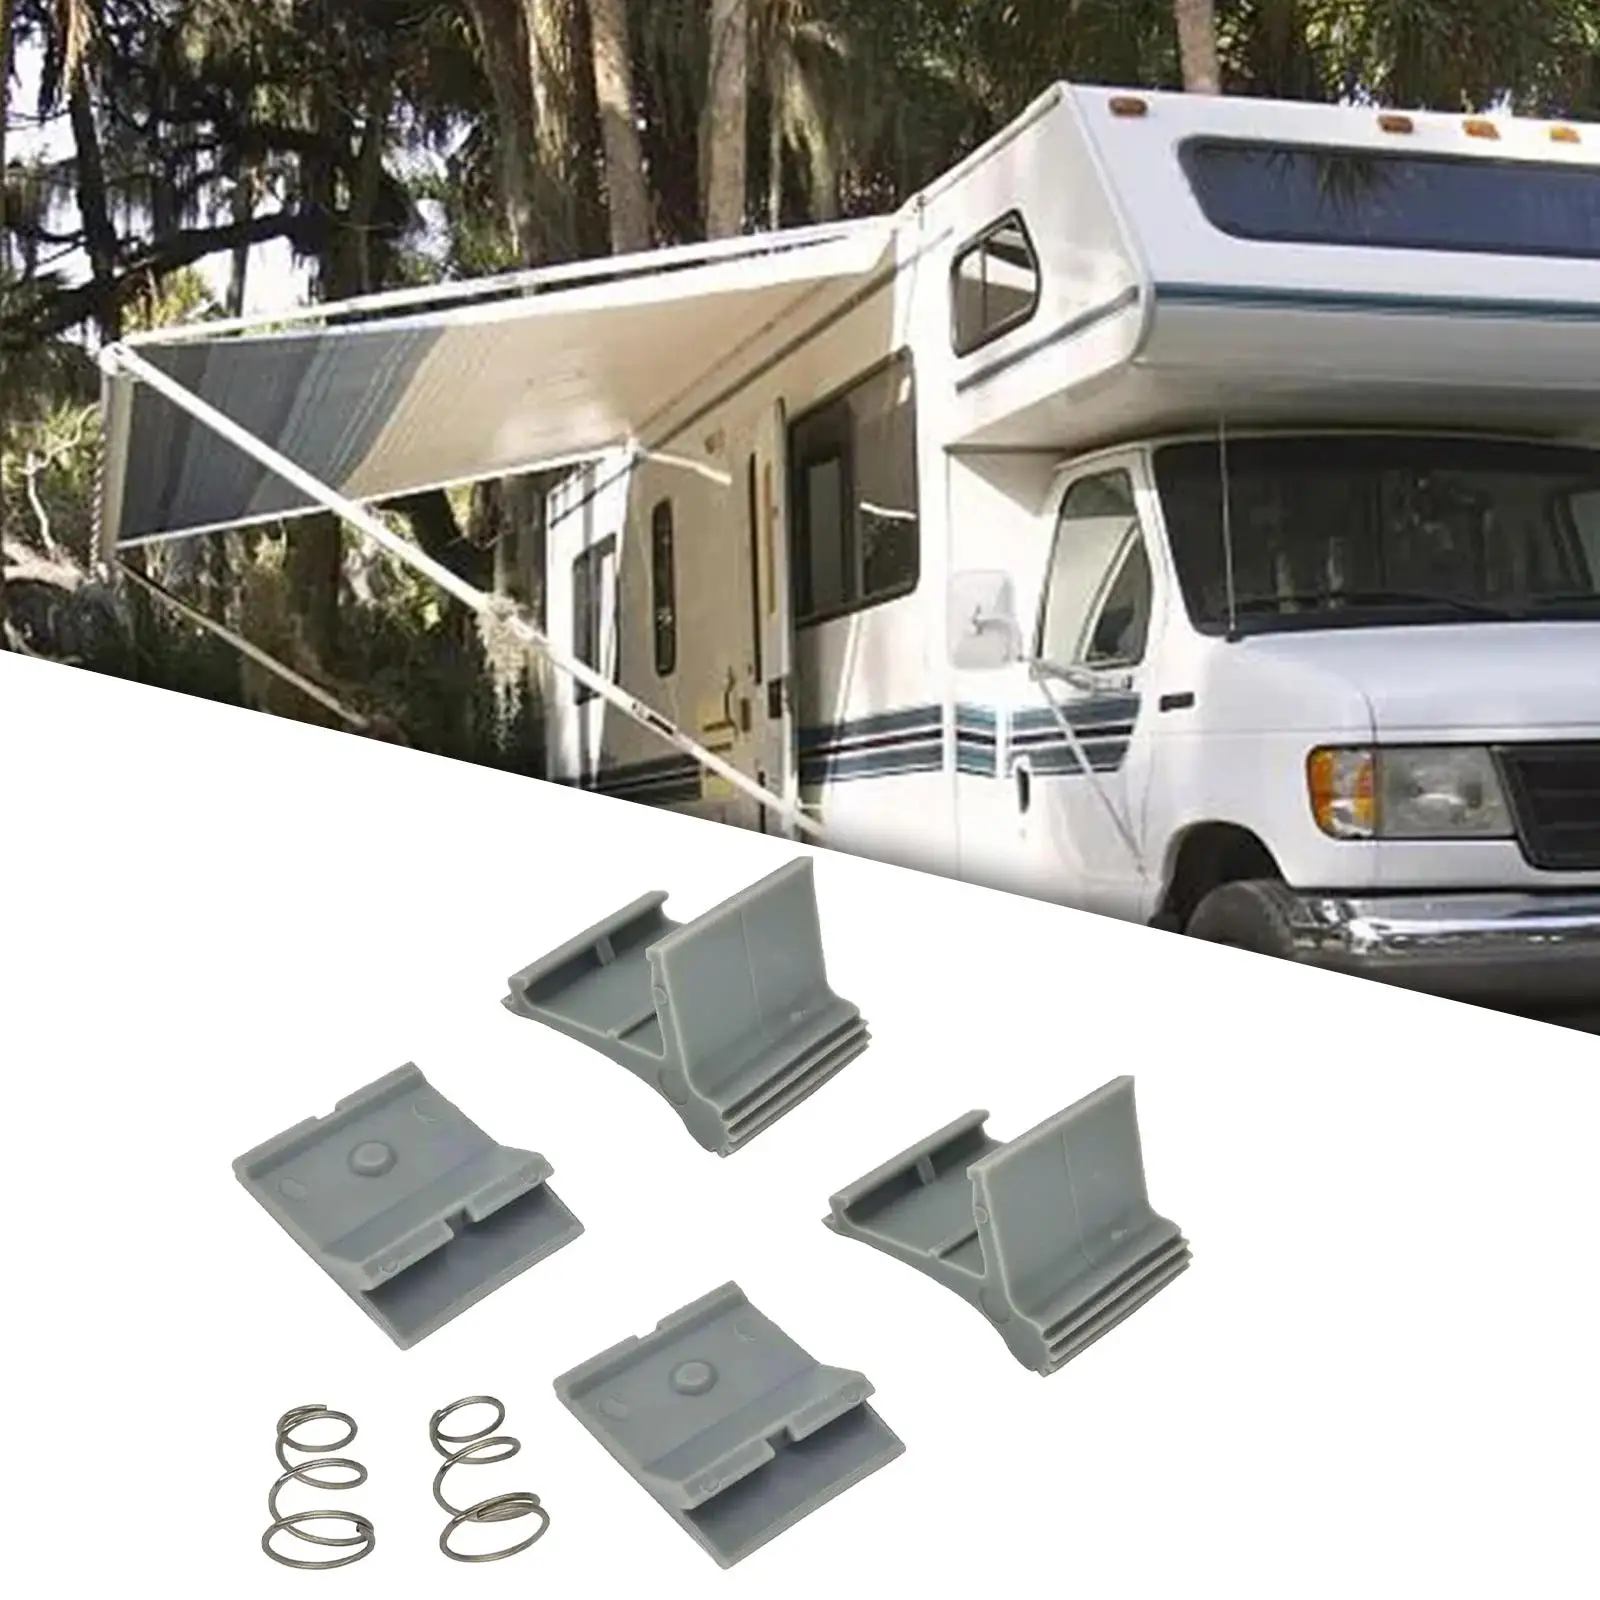 Awning Arm Slider Catch Set with 2 Springs Repair Parts Durable Assembly Replaces Easy Installation for Trailer Camper RV